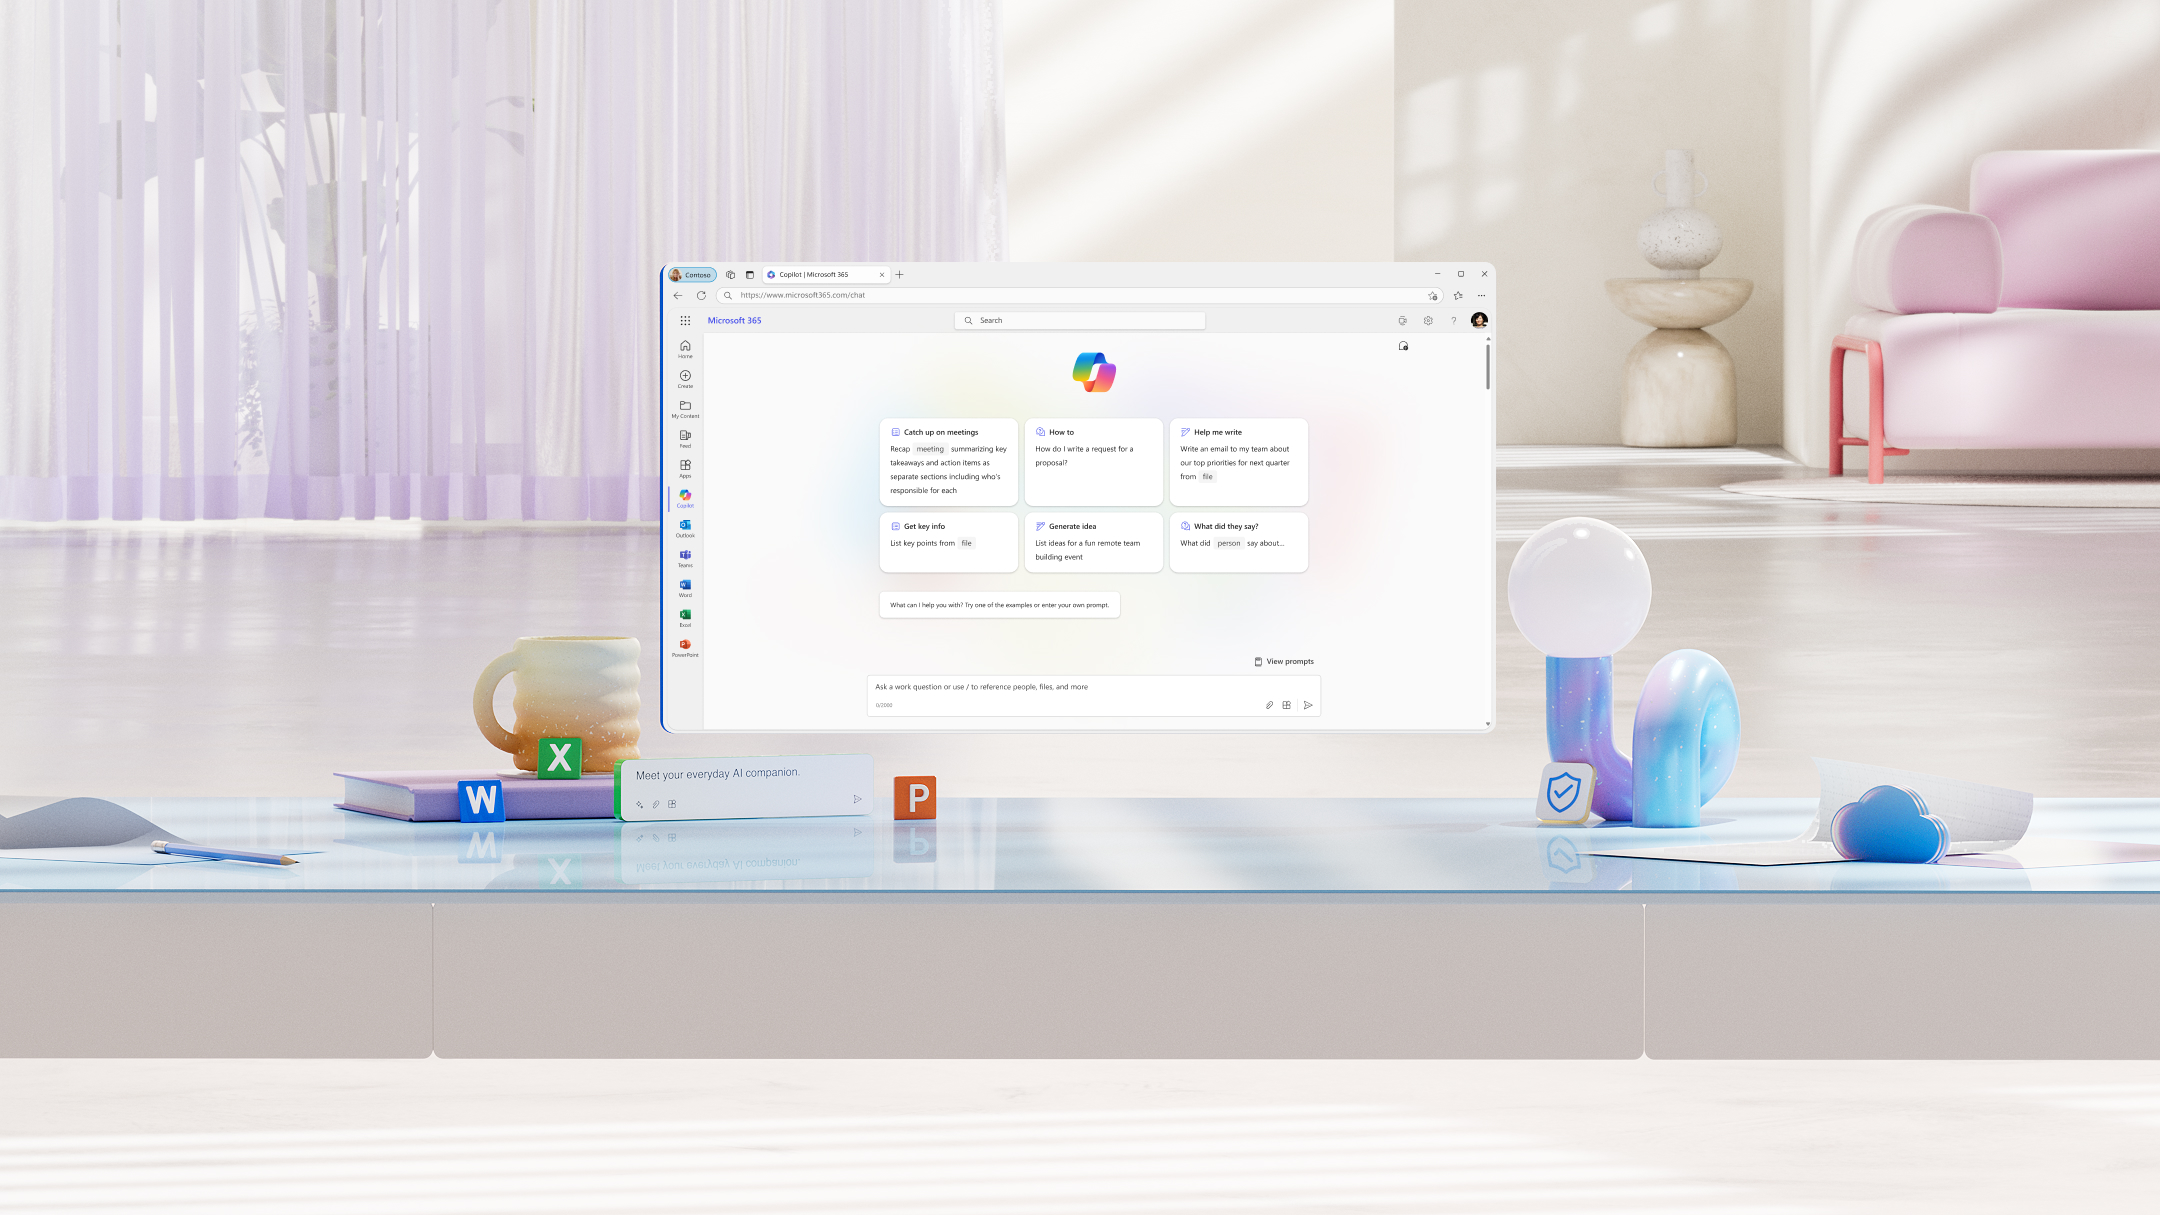 The Copilot for Microsoft 365 page showing recommended prompts. Copilot for Microsoft 365 enables users to enhance their creativity, productivity, and skills.